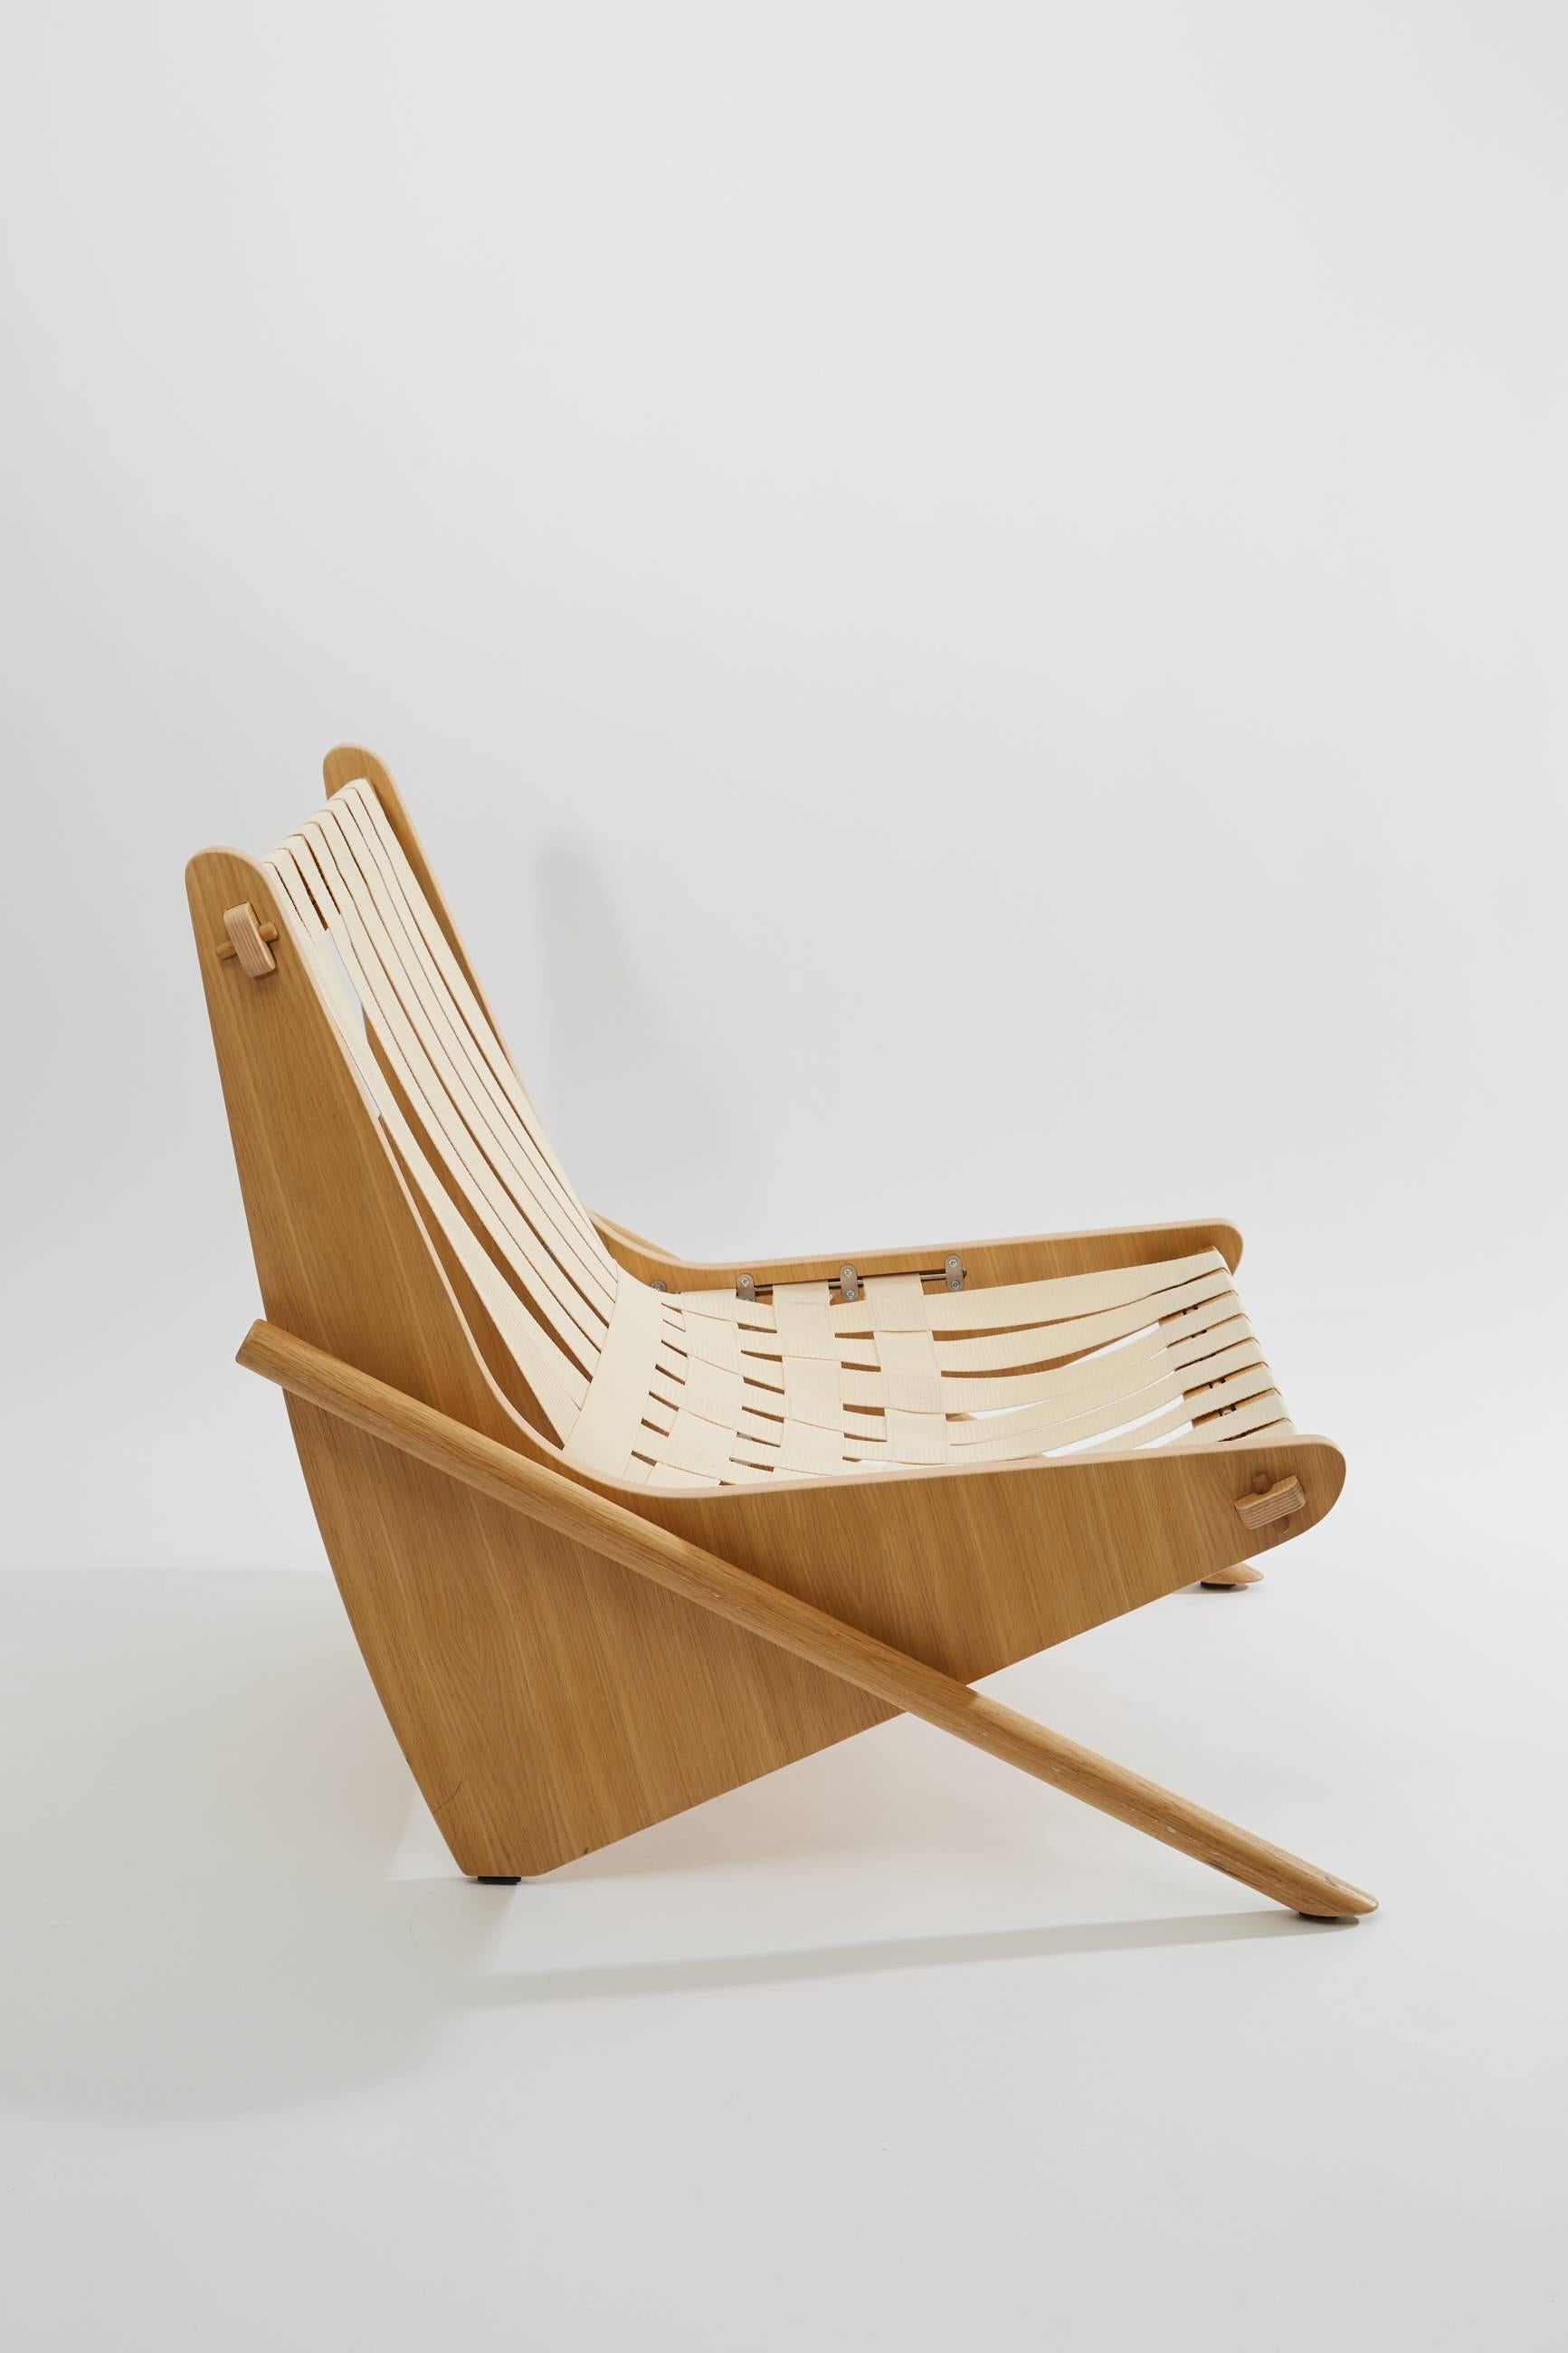 American Richard Neutra Boomerang Lounge Chair in Natural Wood and Yarn, 1942 For Sale